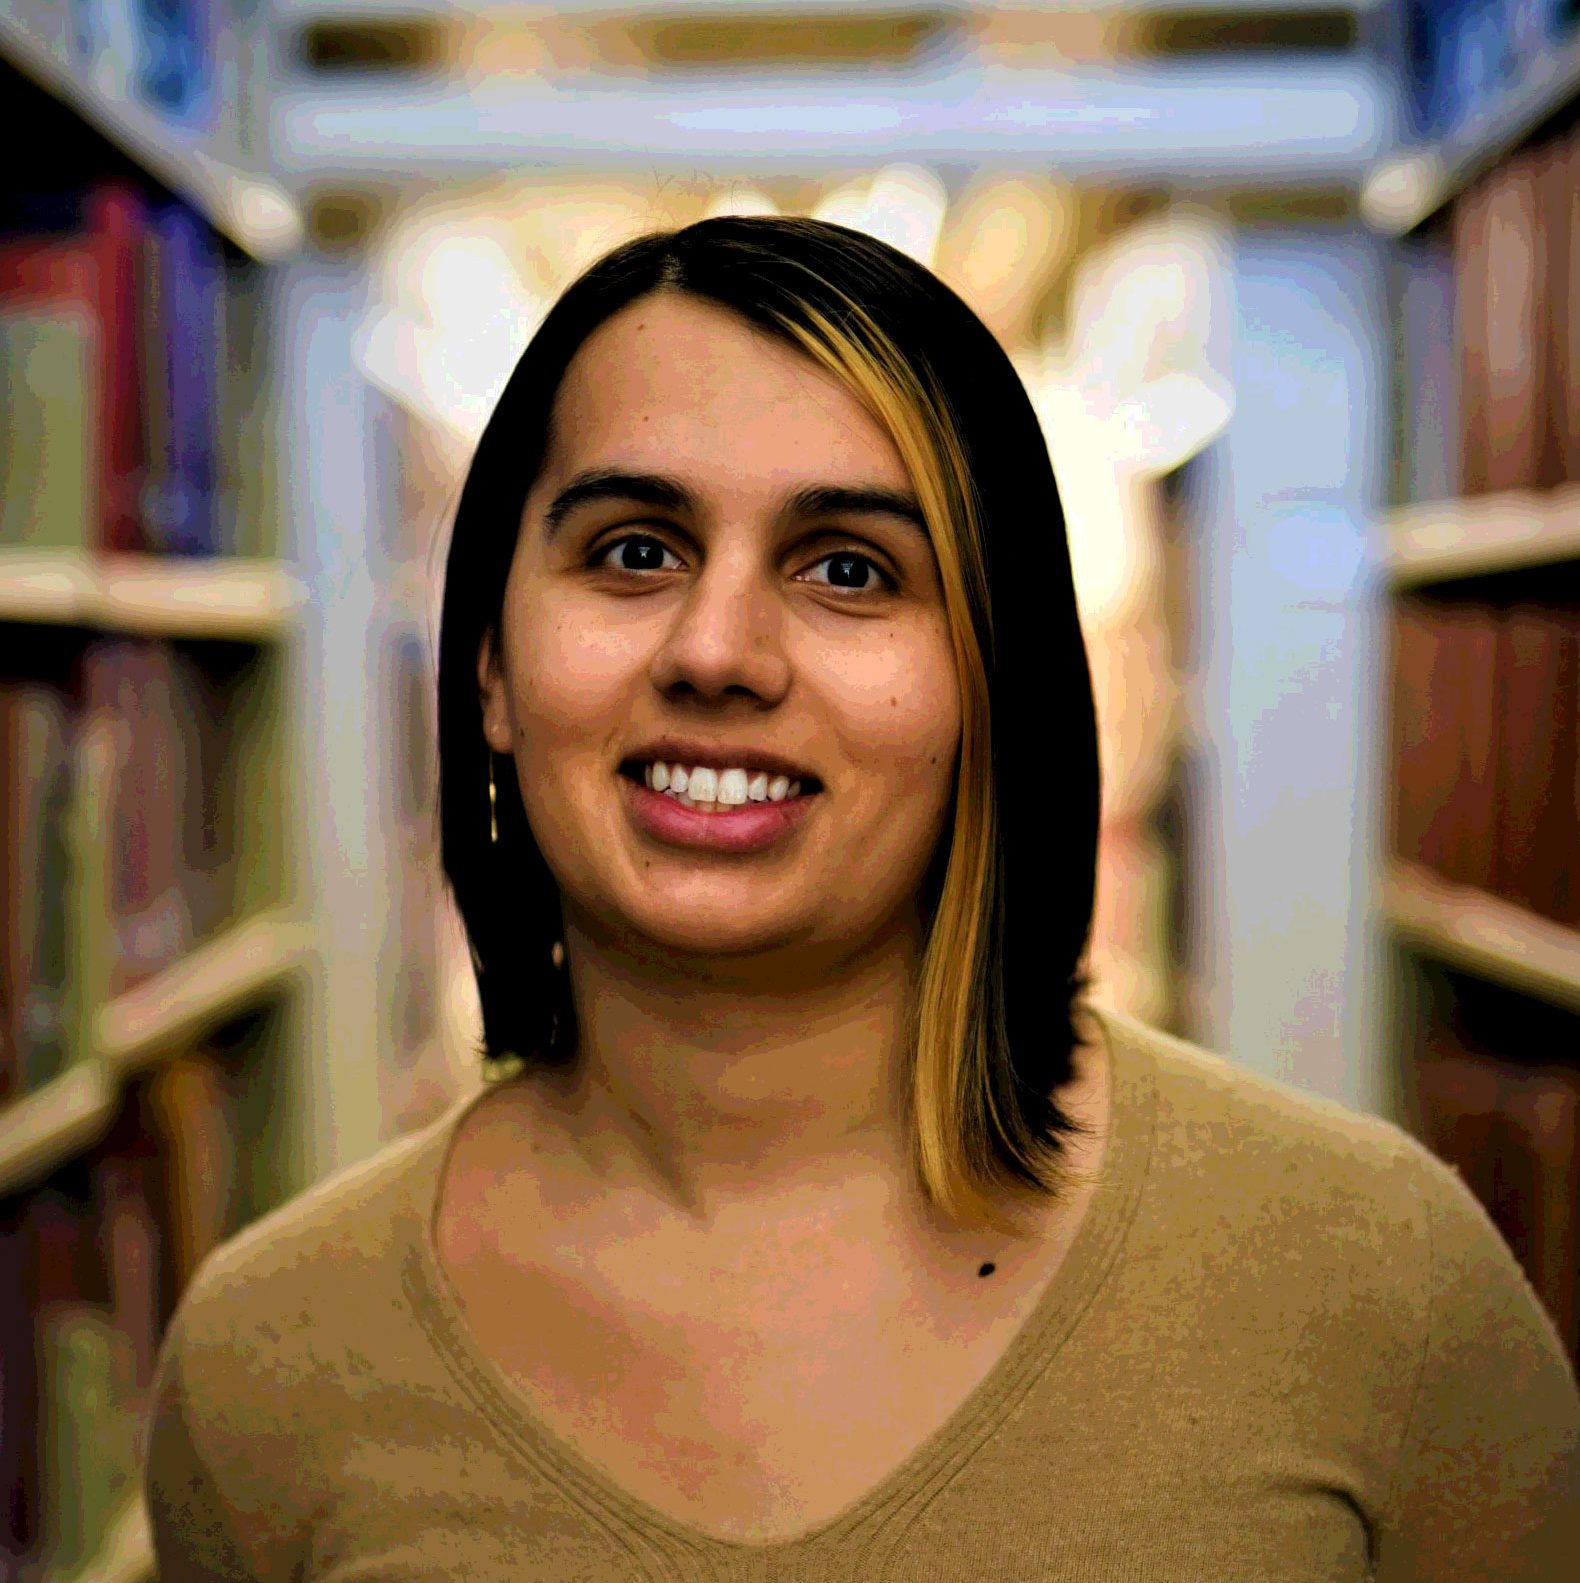 Image of Serena Lukas Bhandar, a smiling woman with brown hair and blonde highlights, wearing a tan dress, standing in a library.